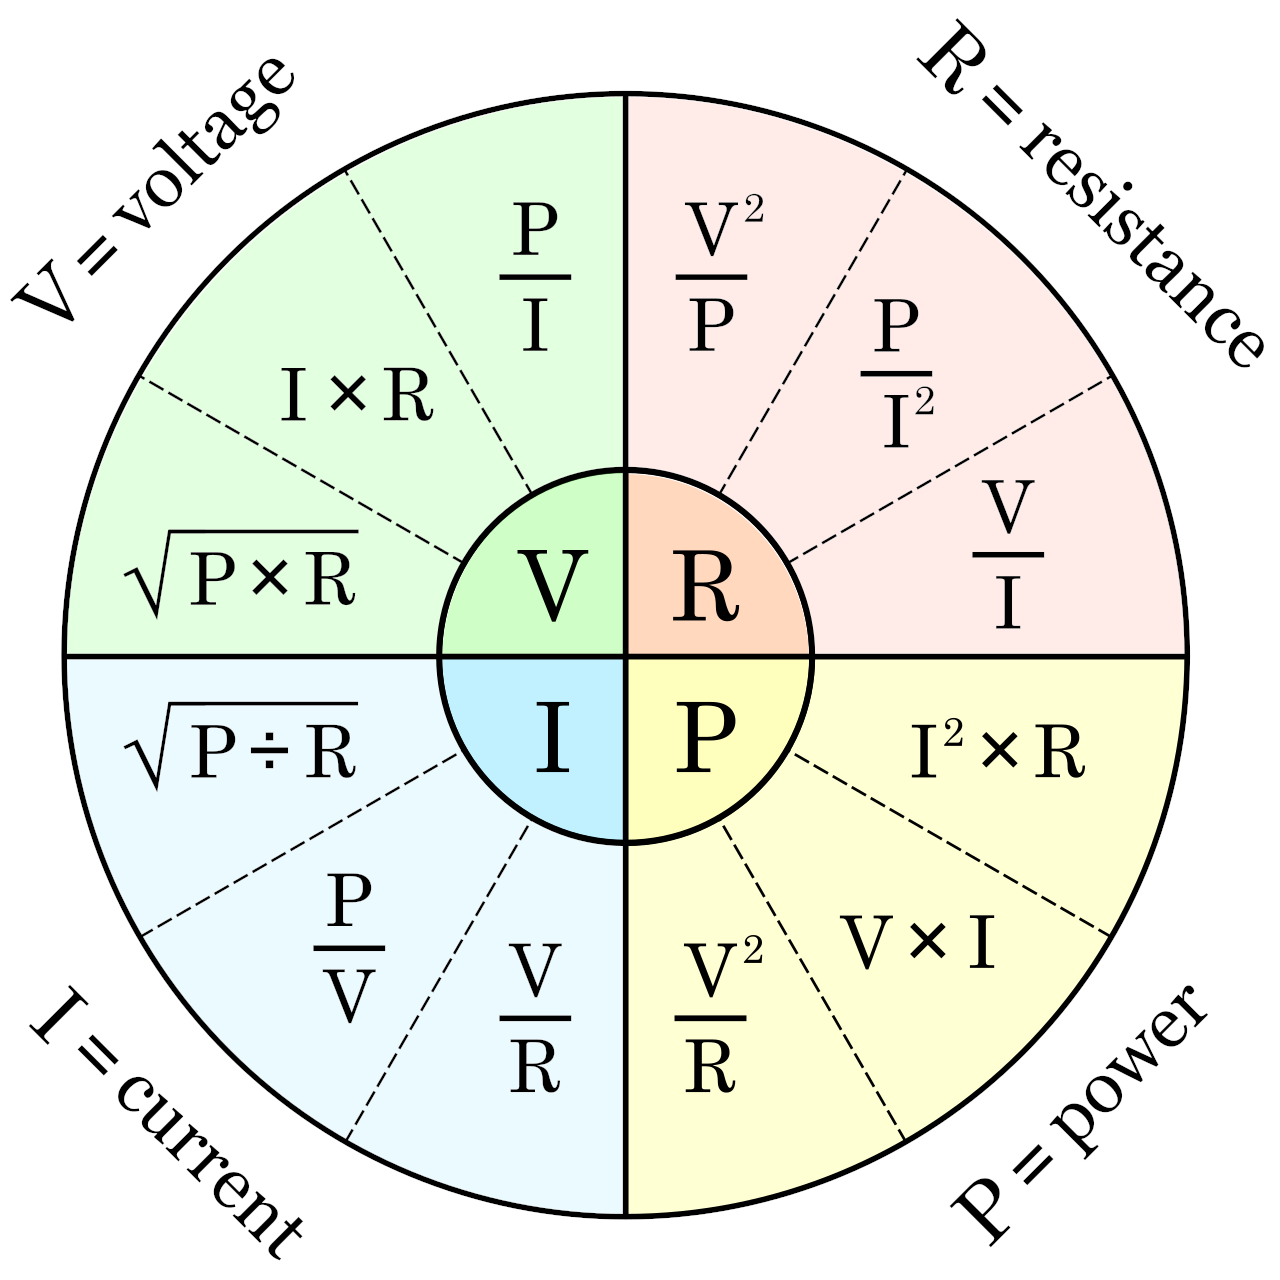 Ohm's Law wheel showing all the formulas to find the voltage in volts, power in watts, current in amps, and resistance in ohms